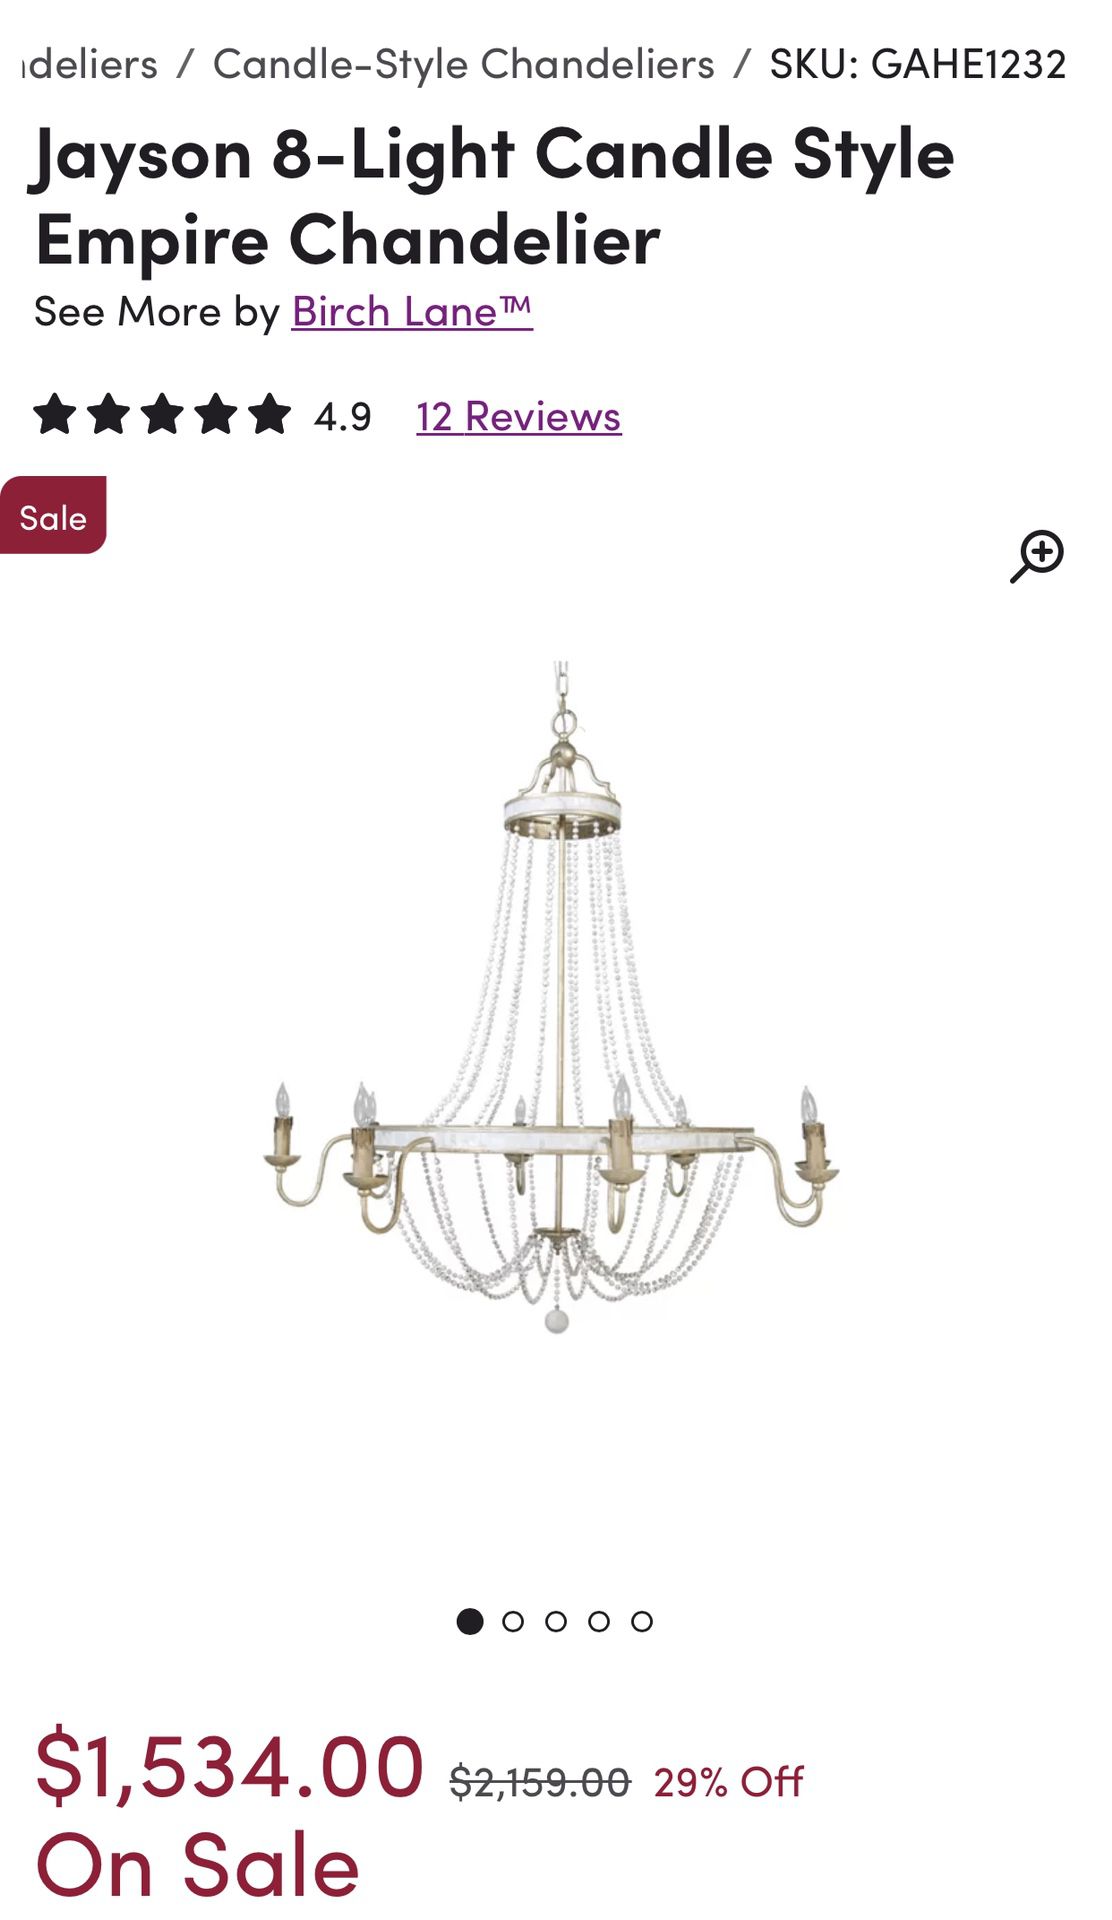 Jayson 8-Light Candle Style Empire Chandelier